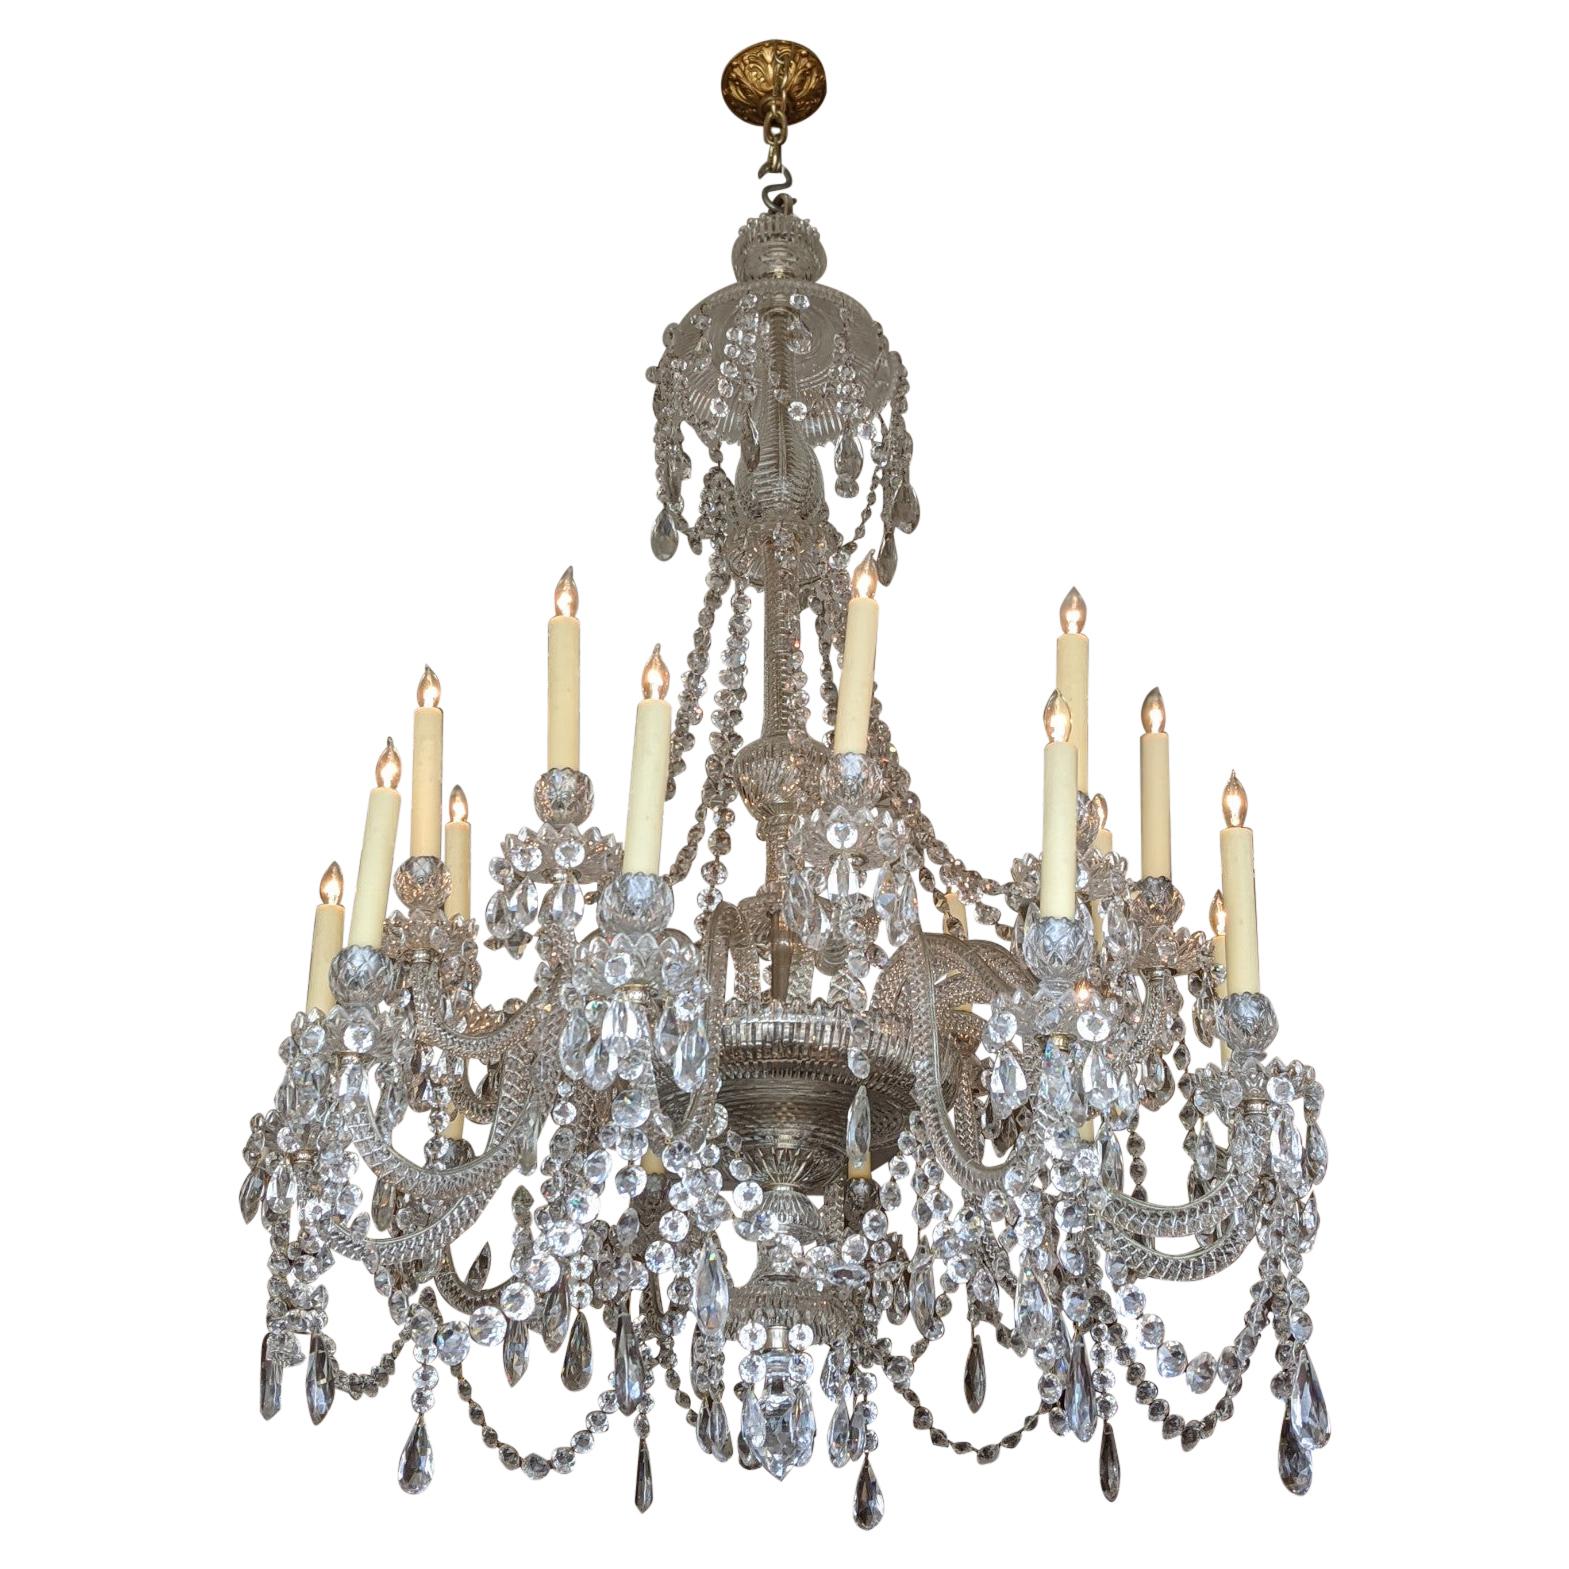 Early Baccarat Crystal Chandelier from France